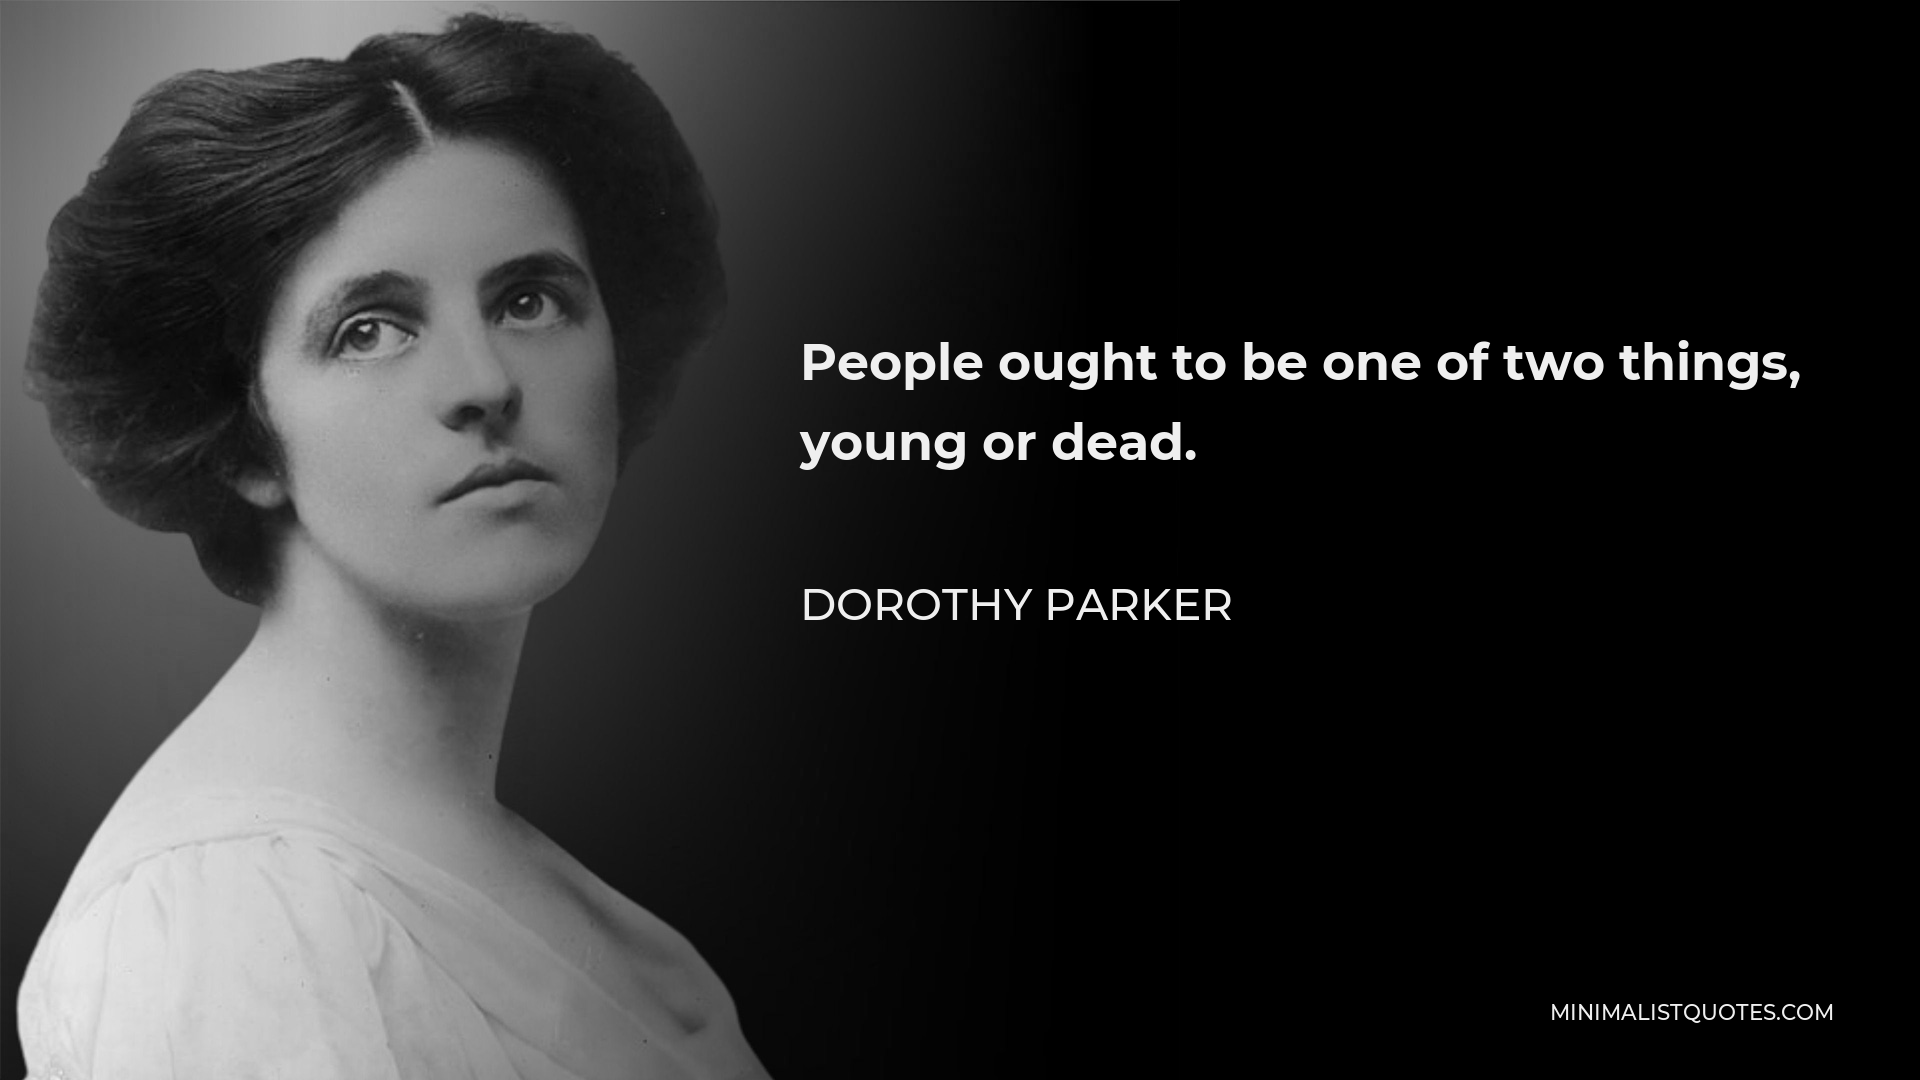 Dorothy Parker Quote - People ought to be one of two things, young or dead.